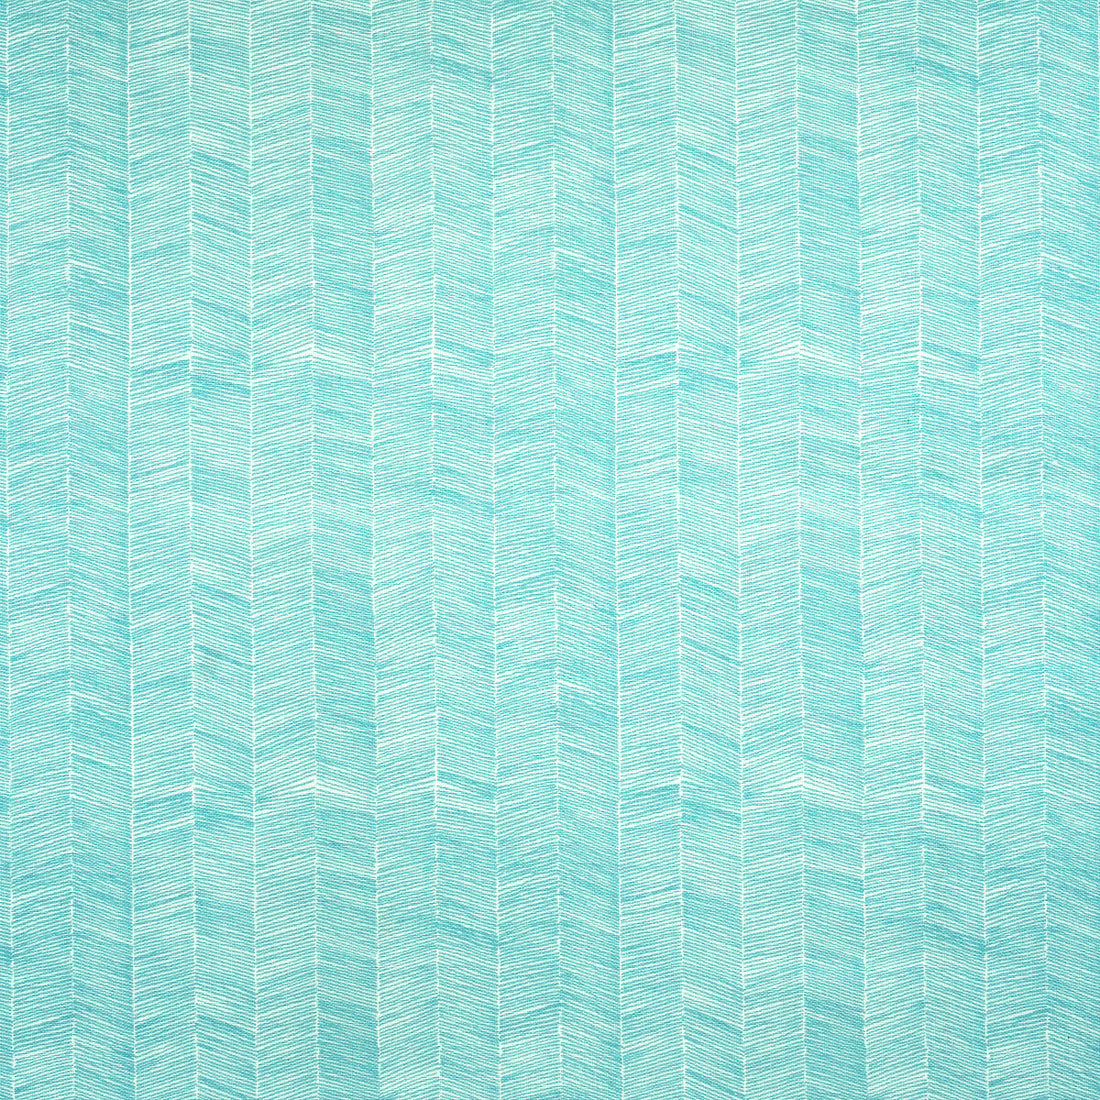 Delta Outdoor fabric in lagoon color - pattern AM100347.13.0 - by Kravet Couture in the Andrew Martin The Great Outdoors collection